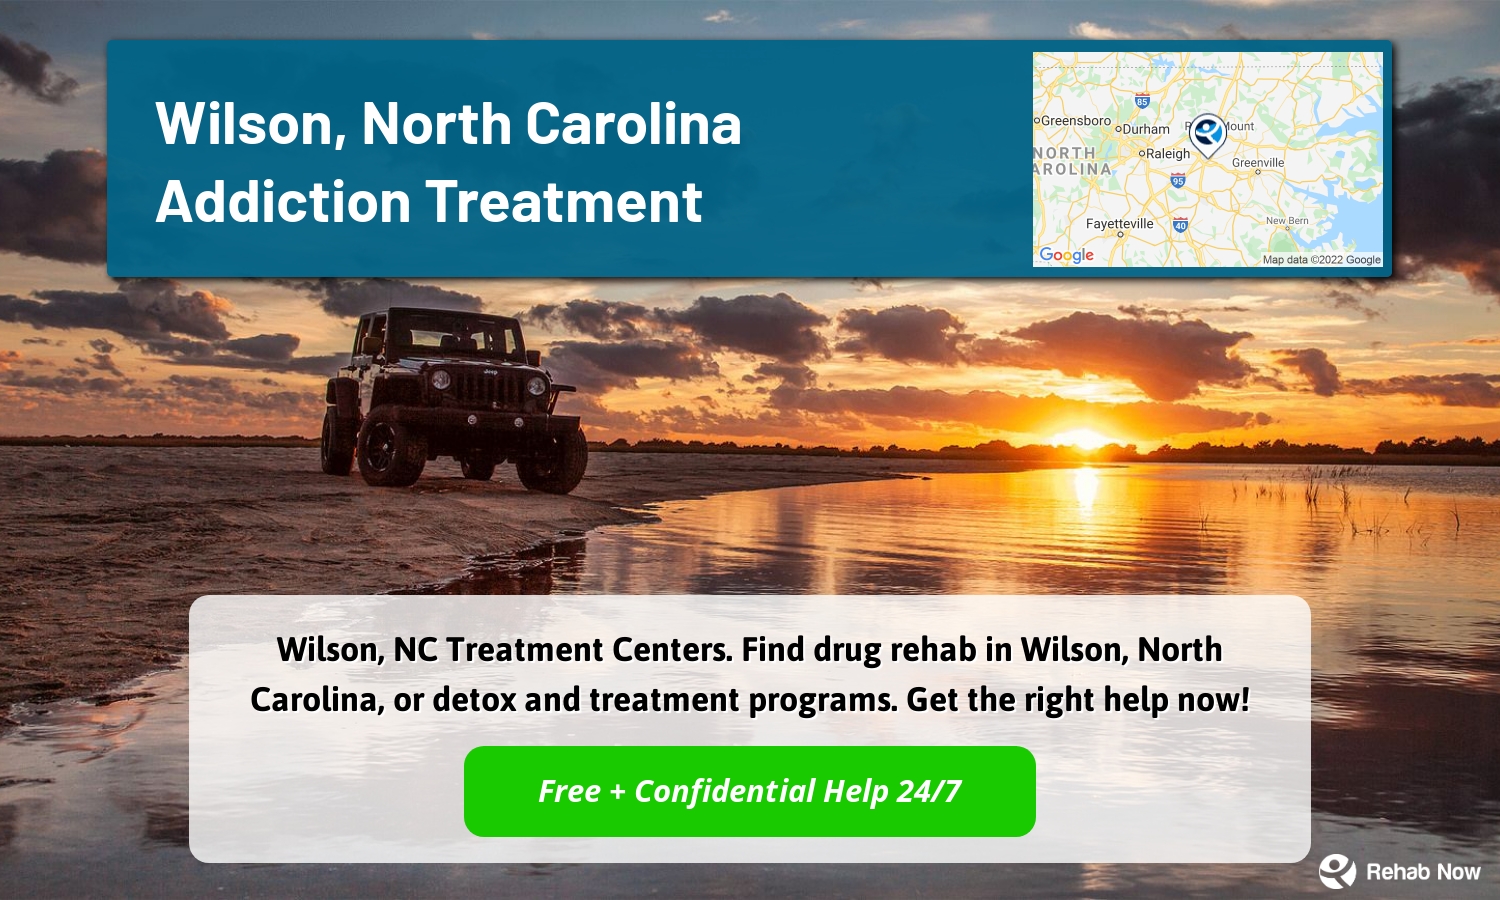 Wilson, NC Treatment Centers. Find drug rehab in Wilson, North Carolina, or detox and treatment programs. Get the right help now!